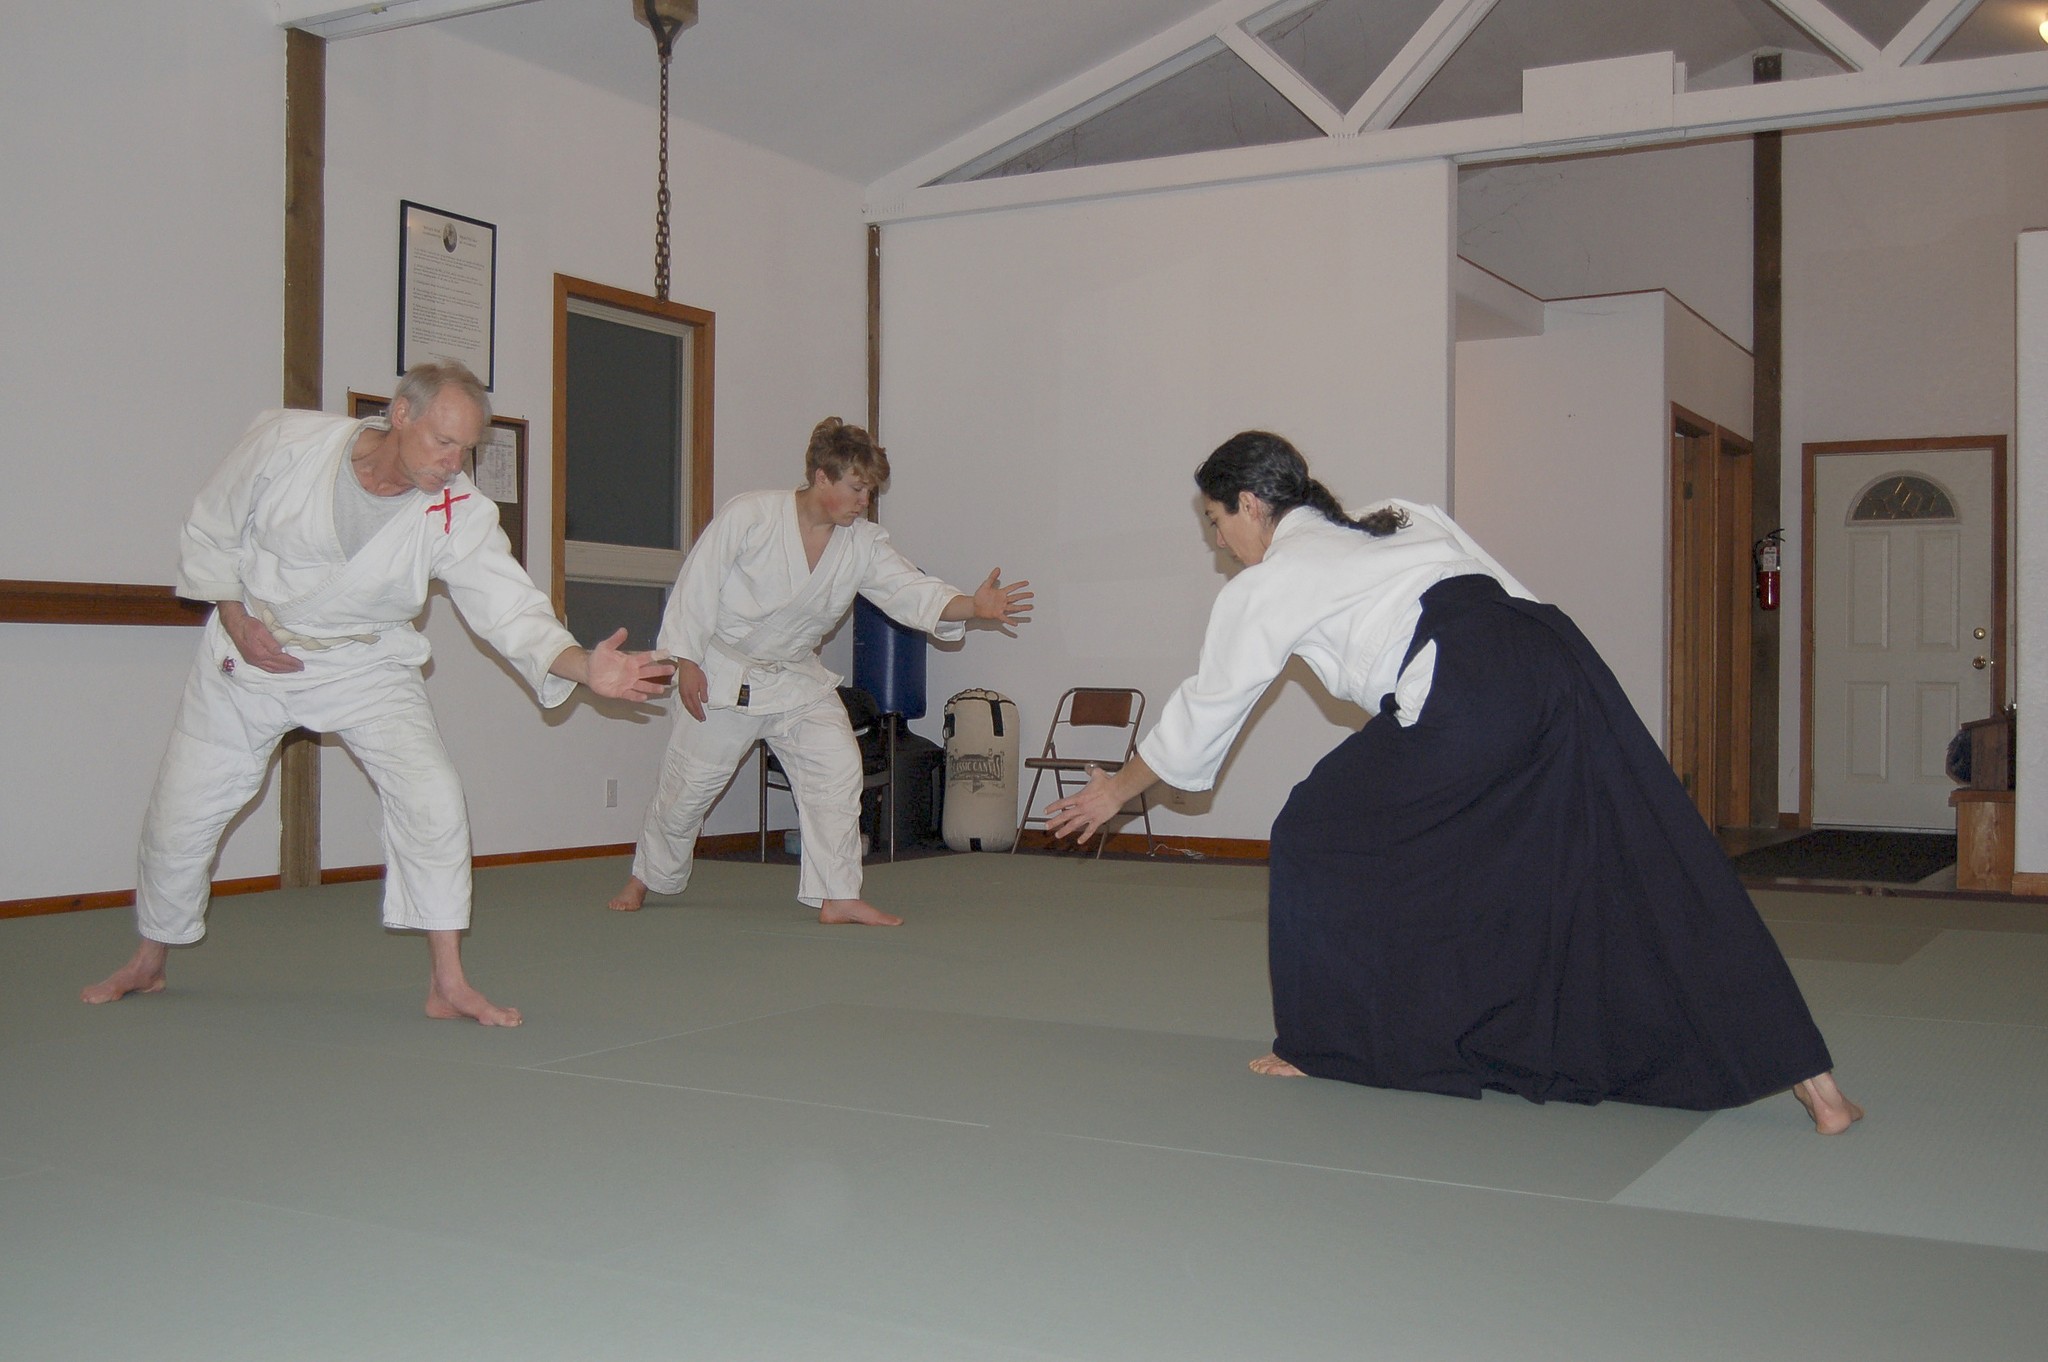 Chief Aikido instructor Neilu Naini leads her students Andy Brastad, left, and William Jevne, right, during a warm-up exercise at the Aikido Dojo off Carlsborg Road in Sequim. Sequim Gazette photos by Erin Hawkins